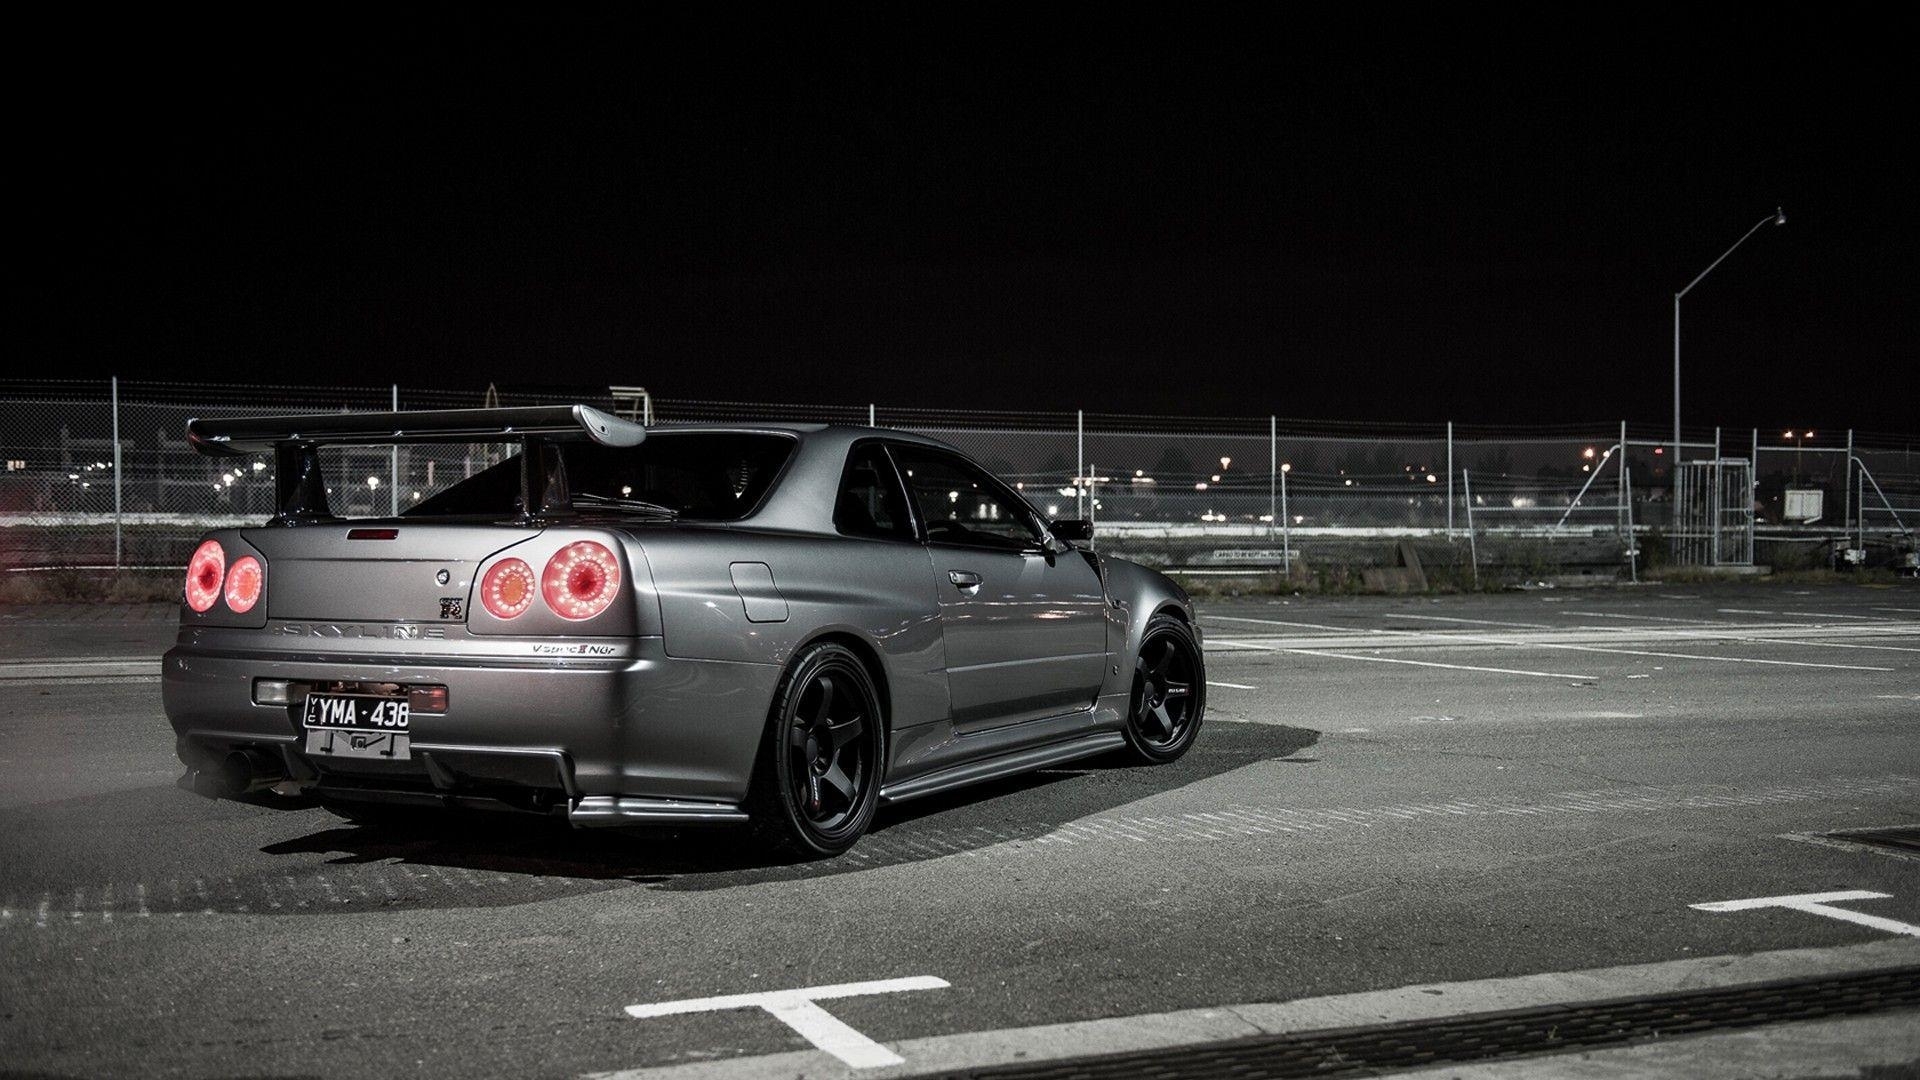 10 Latest Nissan Skyline R34 Wallpapers FULL HD 1080p For PC Background